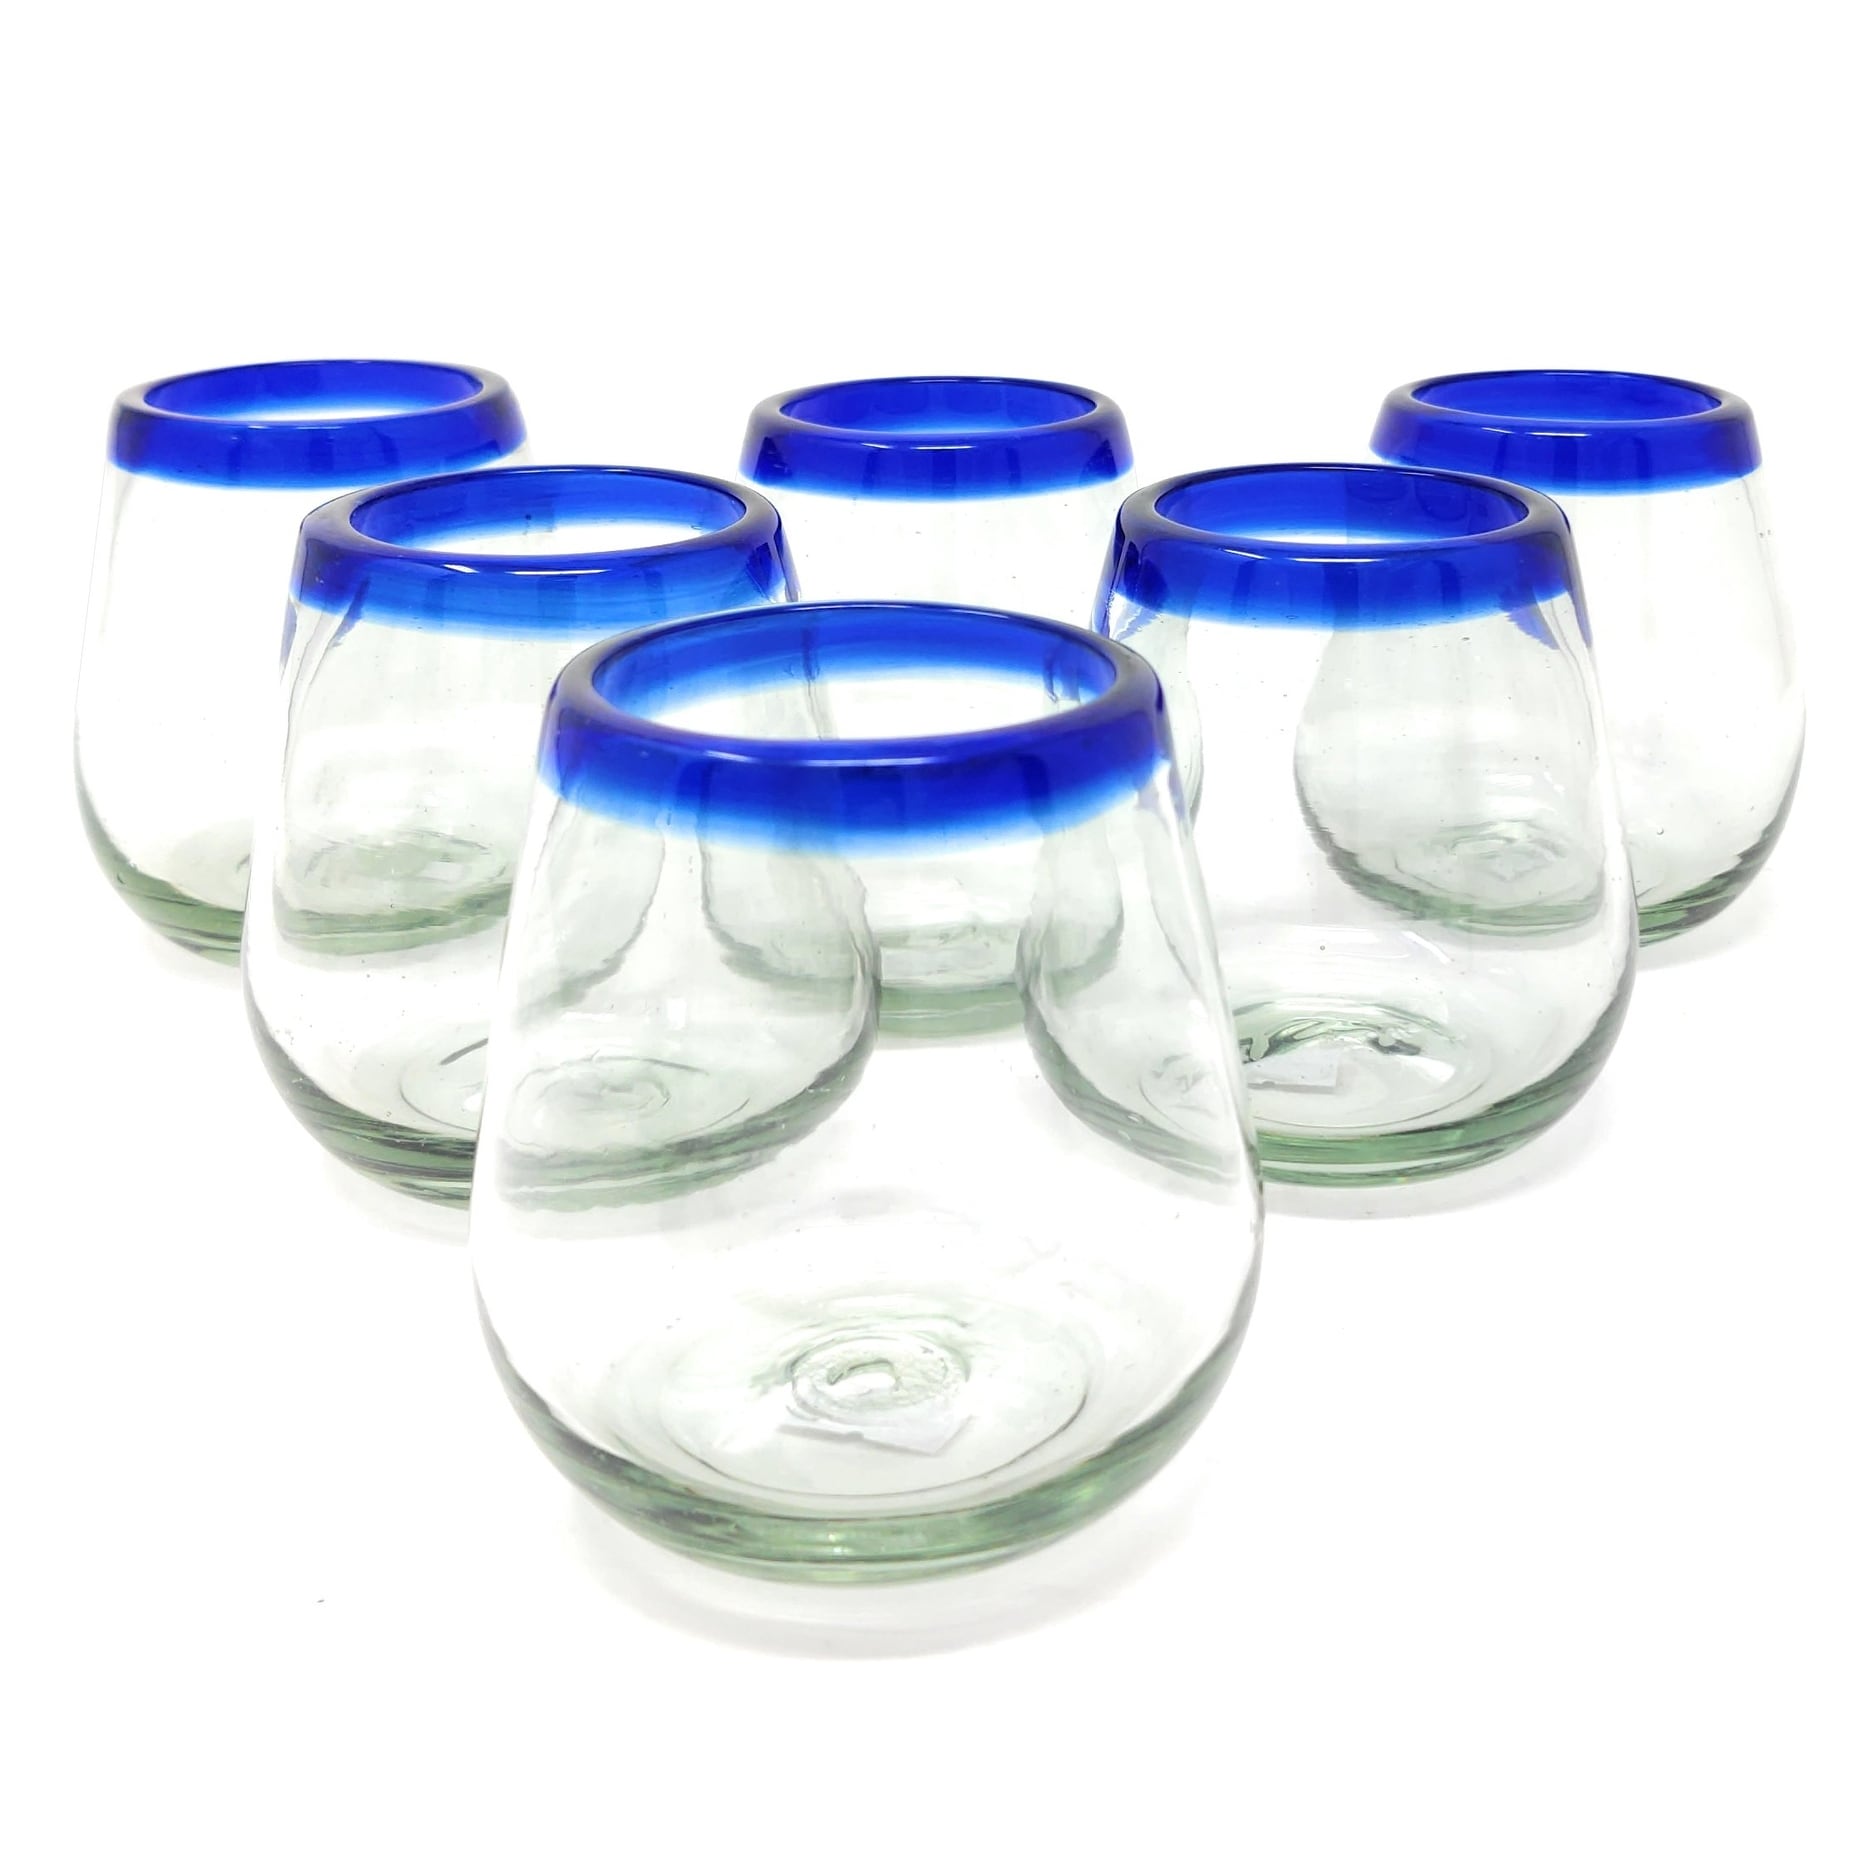 Set of 6 Stemless Wine Glasses Gift Box, 15oz, Clear Sold by at Home